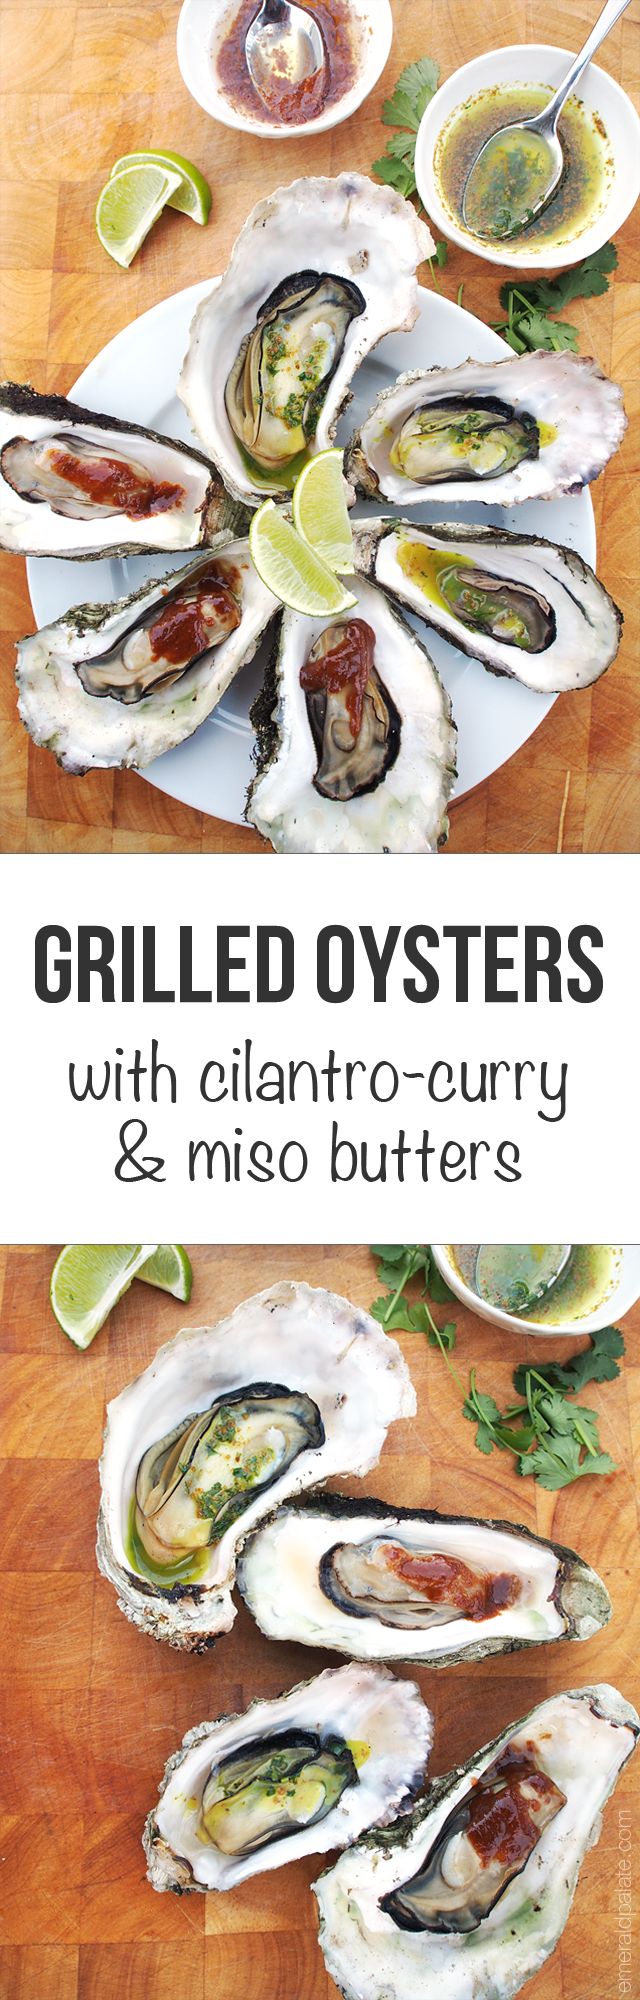 grilled oysters with cilantro-curry & miso butters